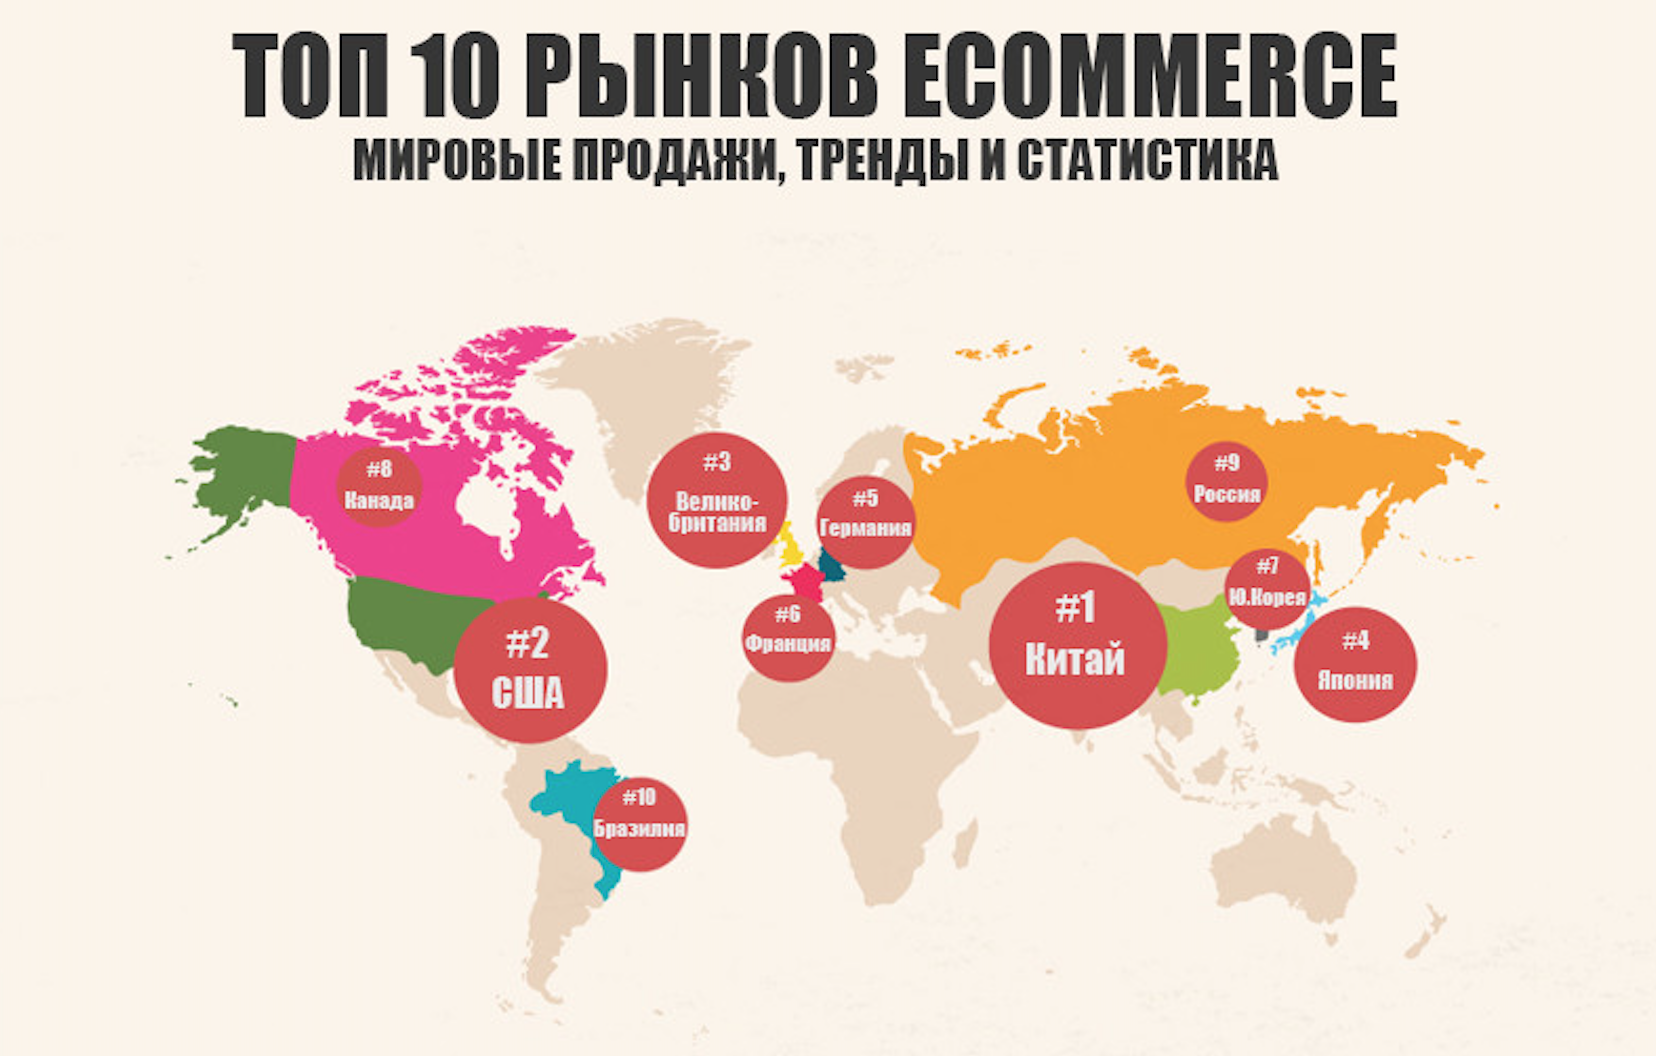 payonline_top10_ecommerce_markets_6